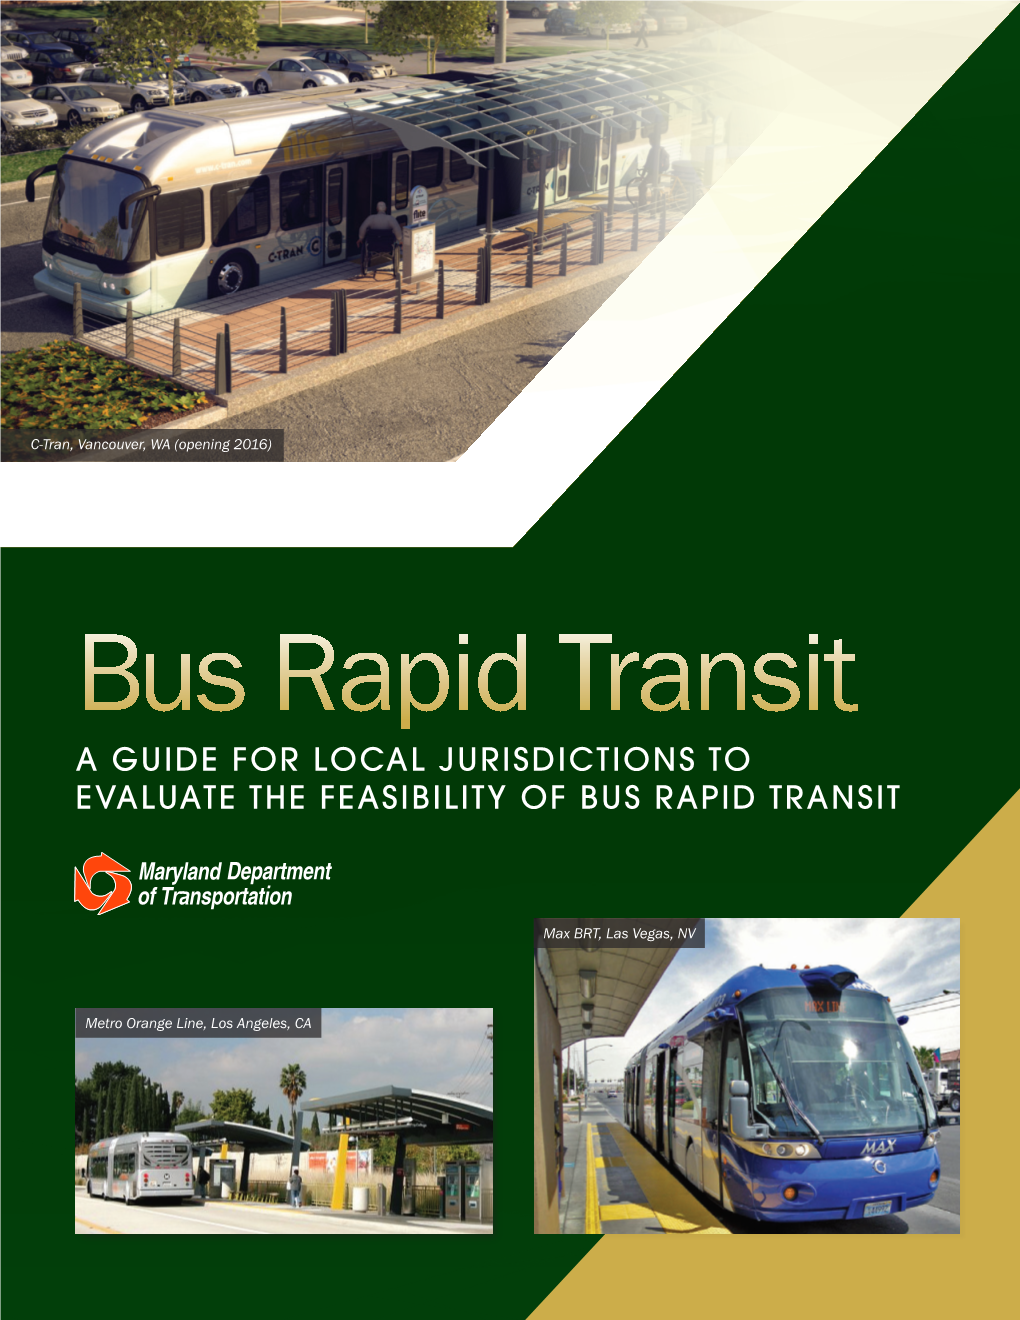 A Guide for Local Jurisdictions to Evaluate the Feasibility of Bus Rapid Transit